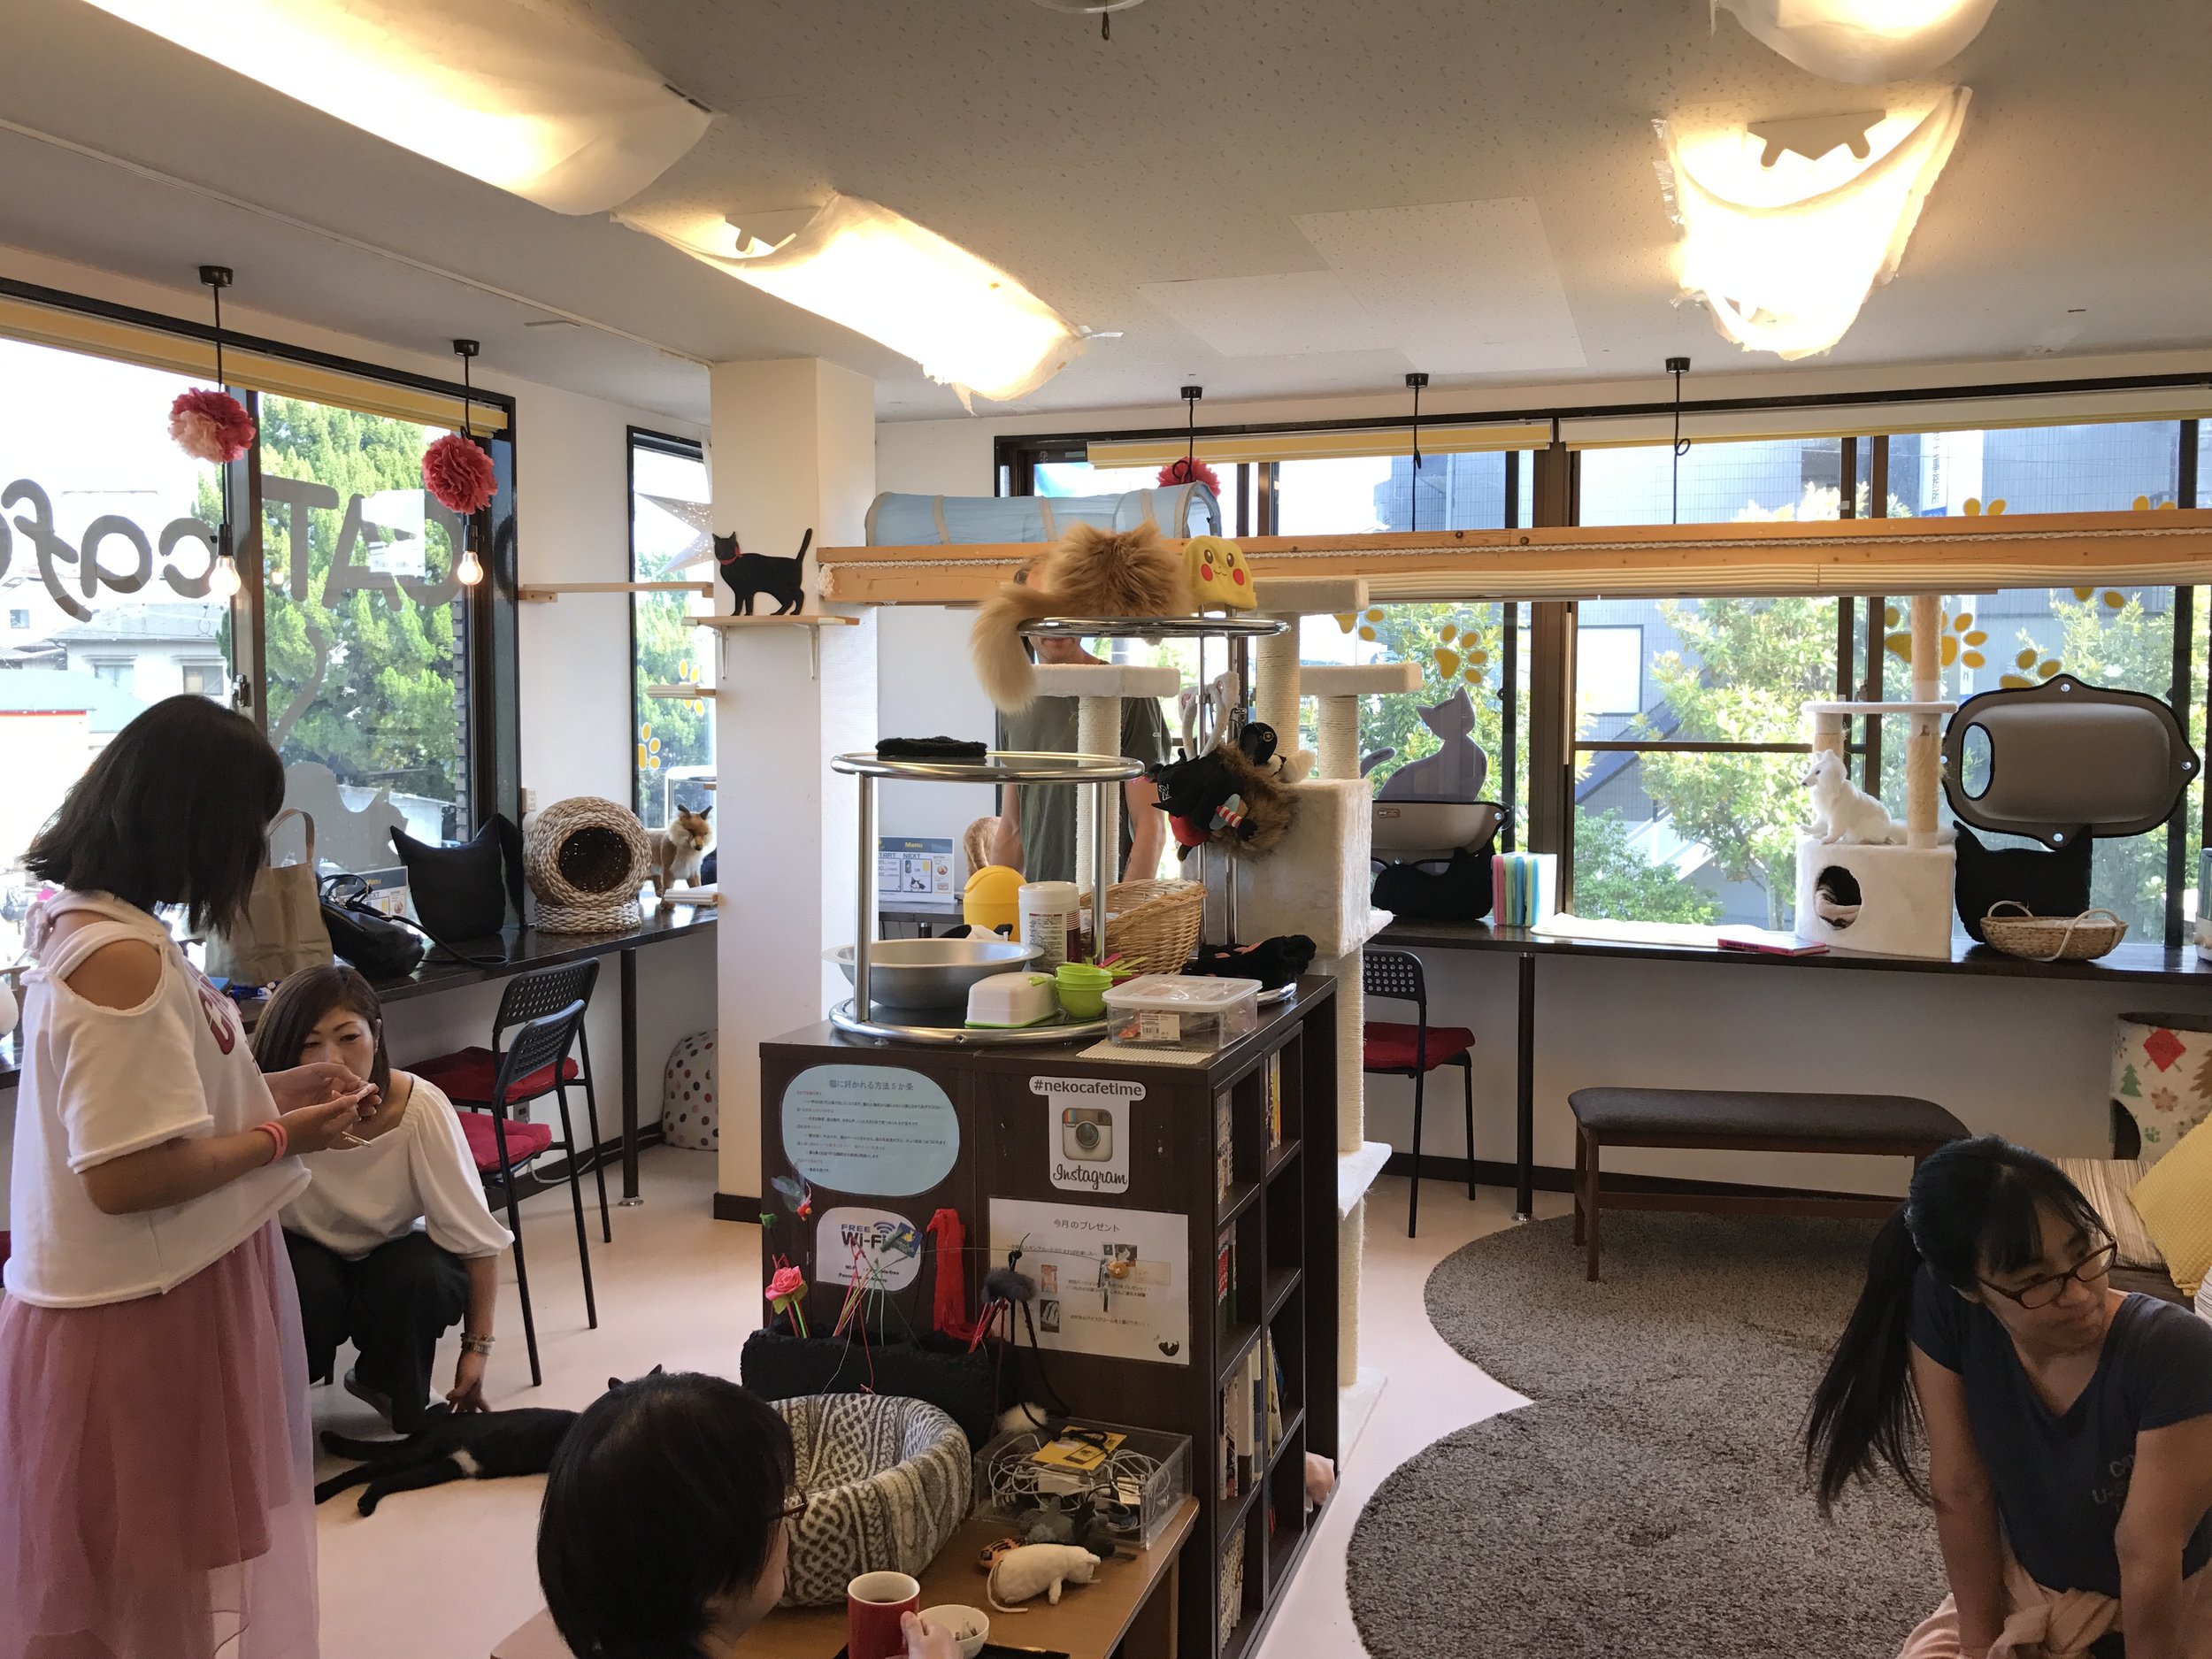 Neko Cafe Time is another great cat cafe in Kyoto, Japan